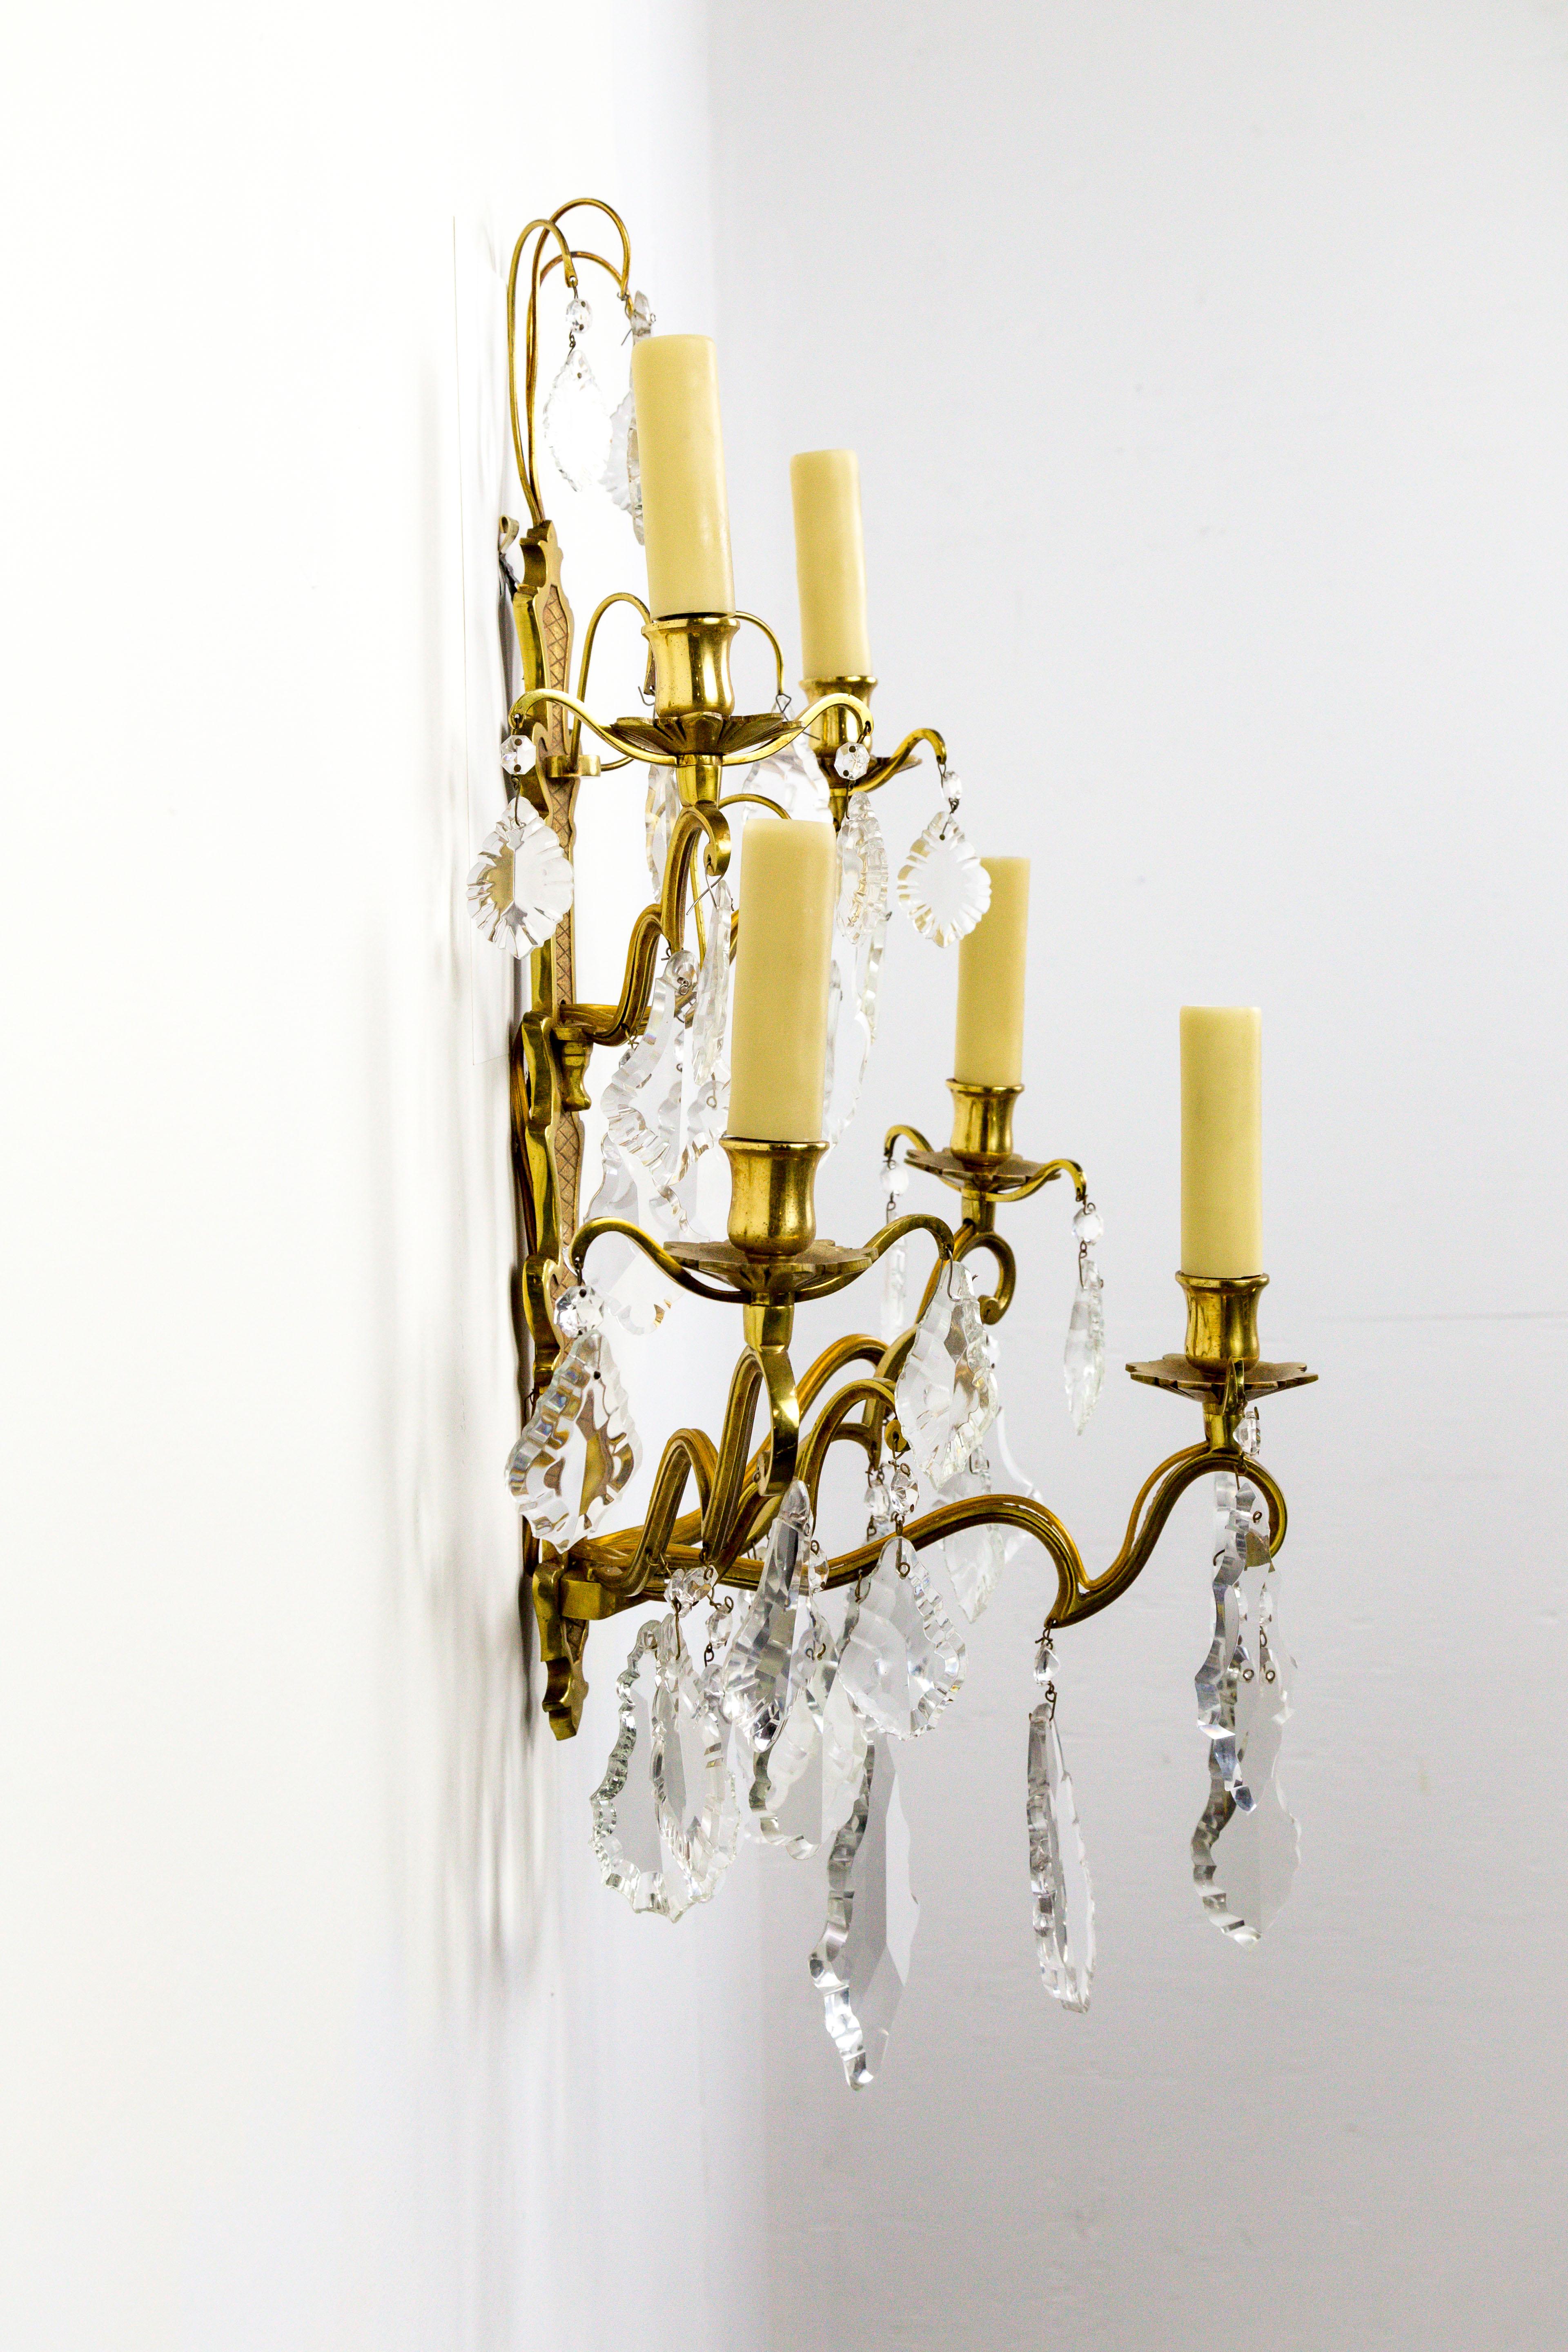 French gilded bronze, double tier, five-arm, candelabra sconce in the Belle Époque style. With heavy, French pendalogue crystals, and polybeeswax candle covers, circa 1910. Newly rewired. Measures: 17